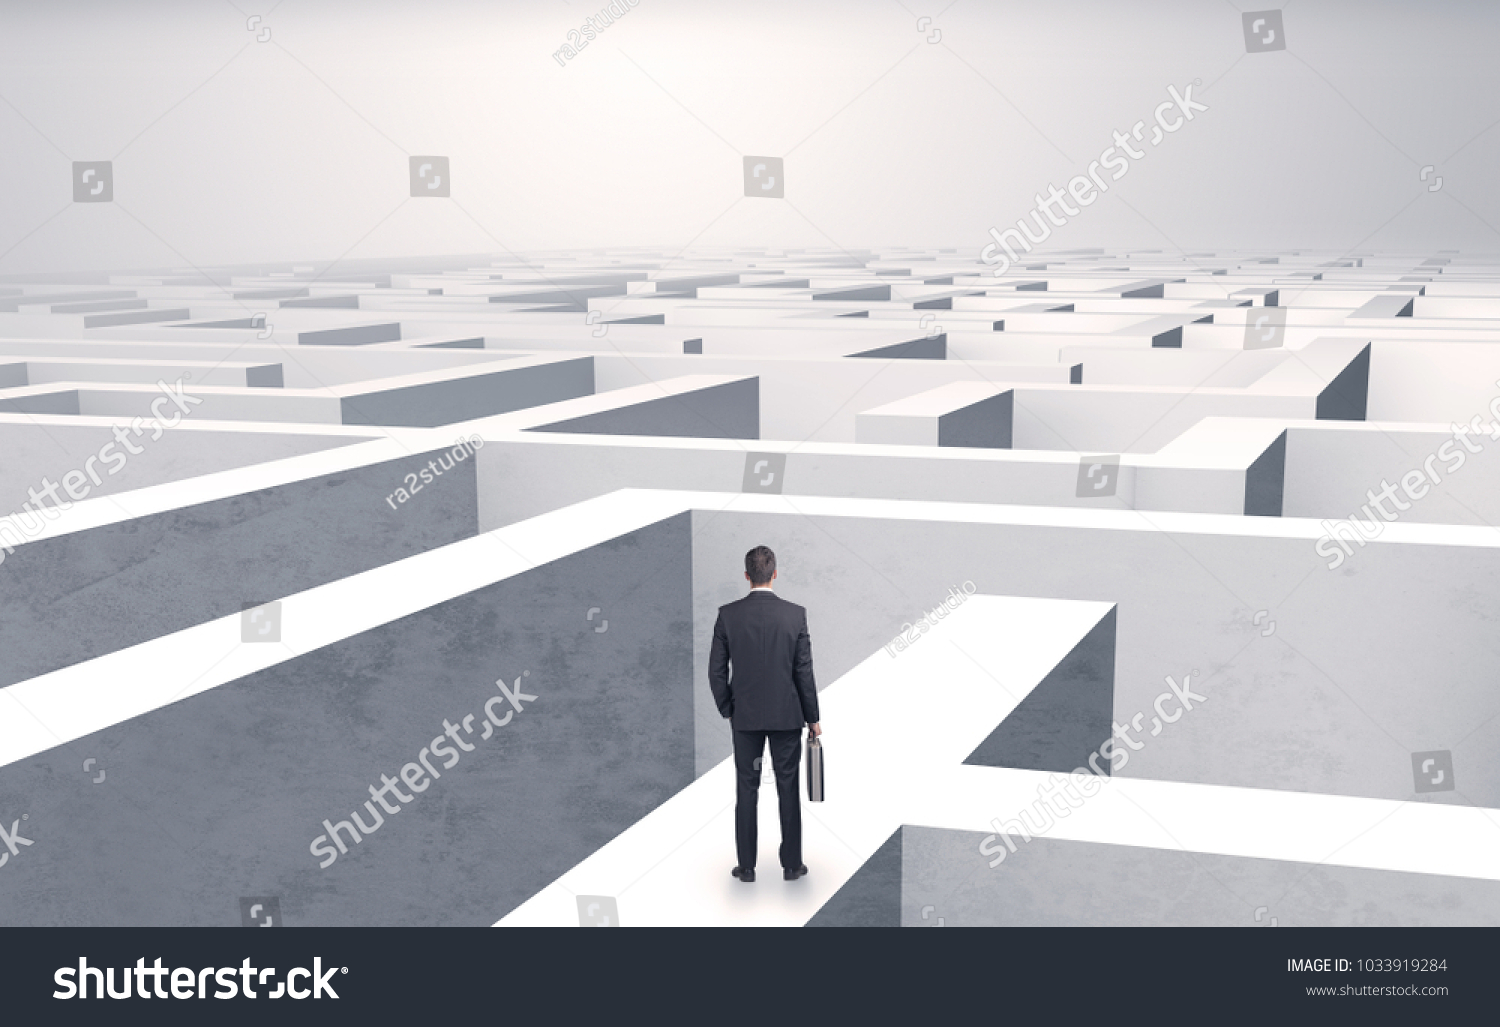 Small businessman in a middle of a huge maze
 #1033919284